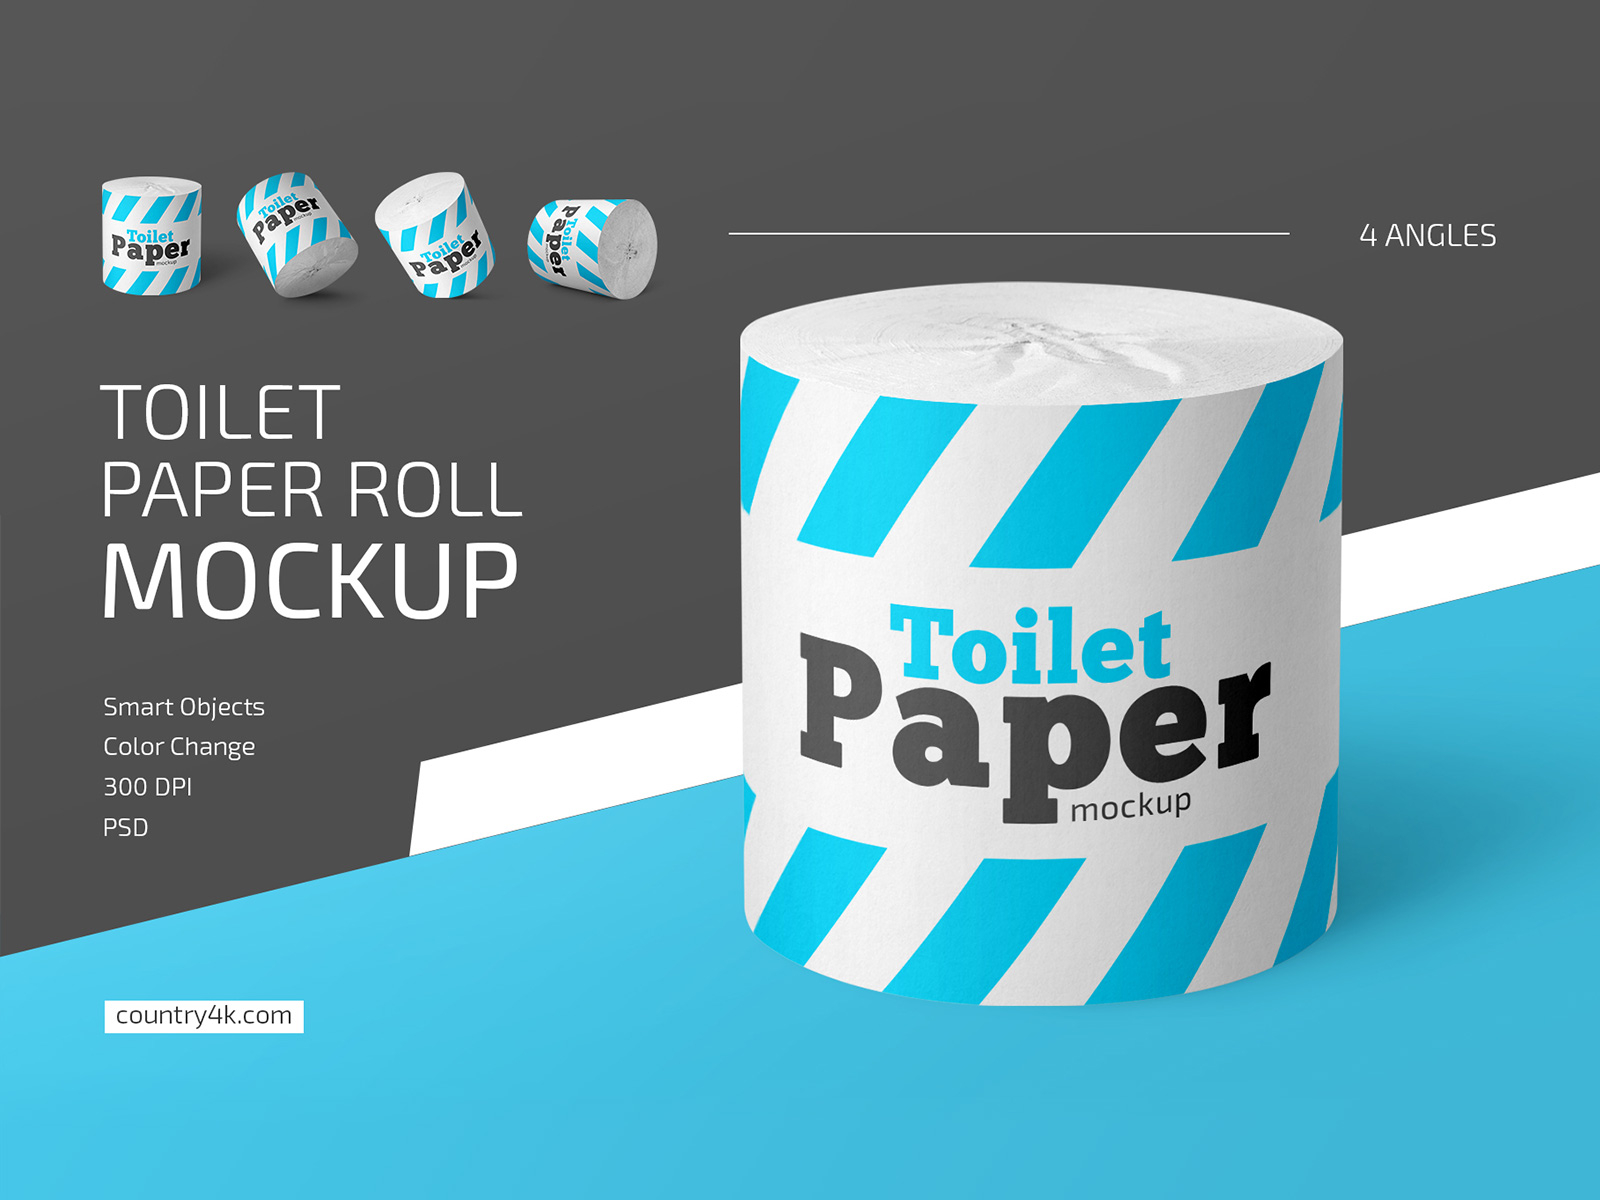 Download Toilet Paper Roll Mockup Set by Country4k on Dribbble